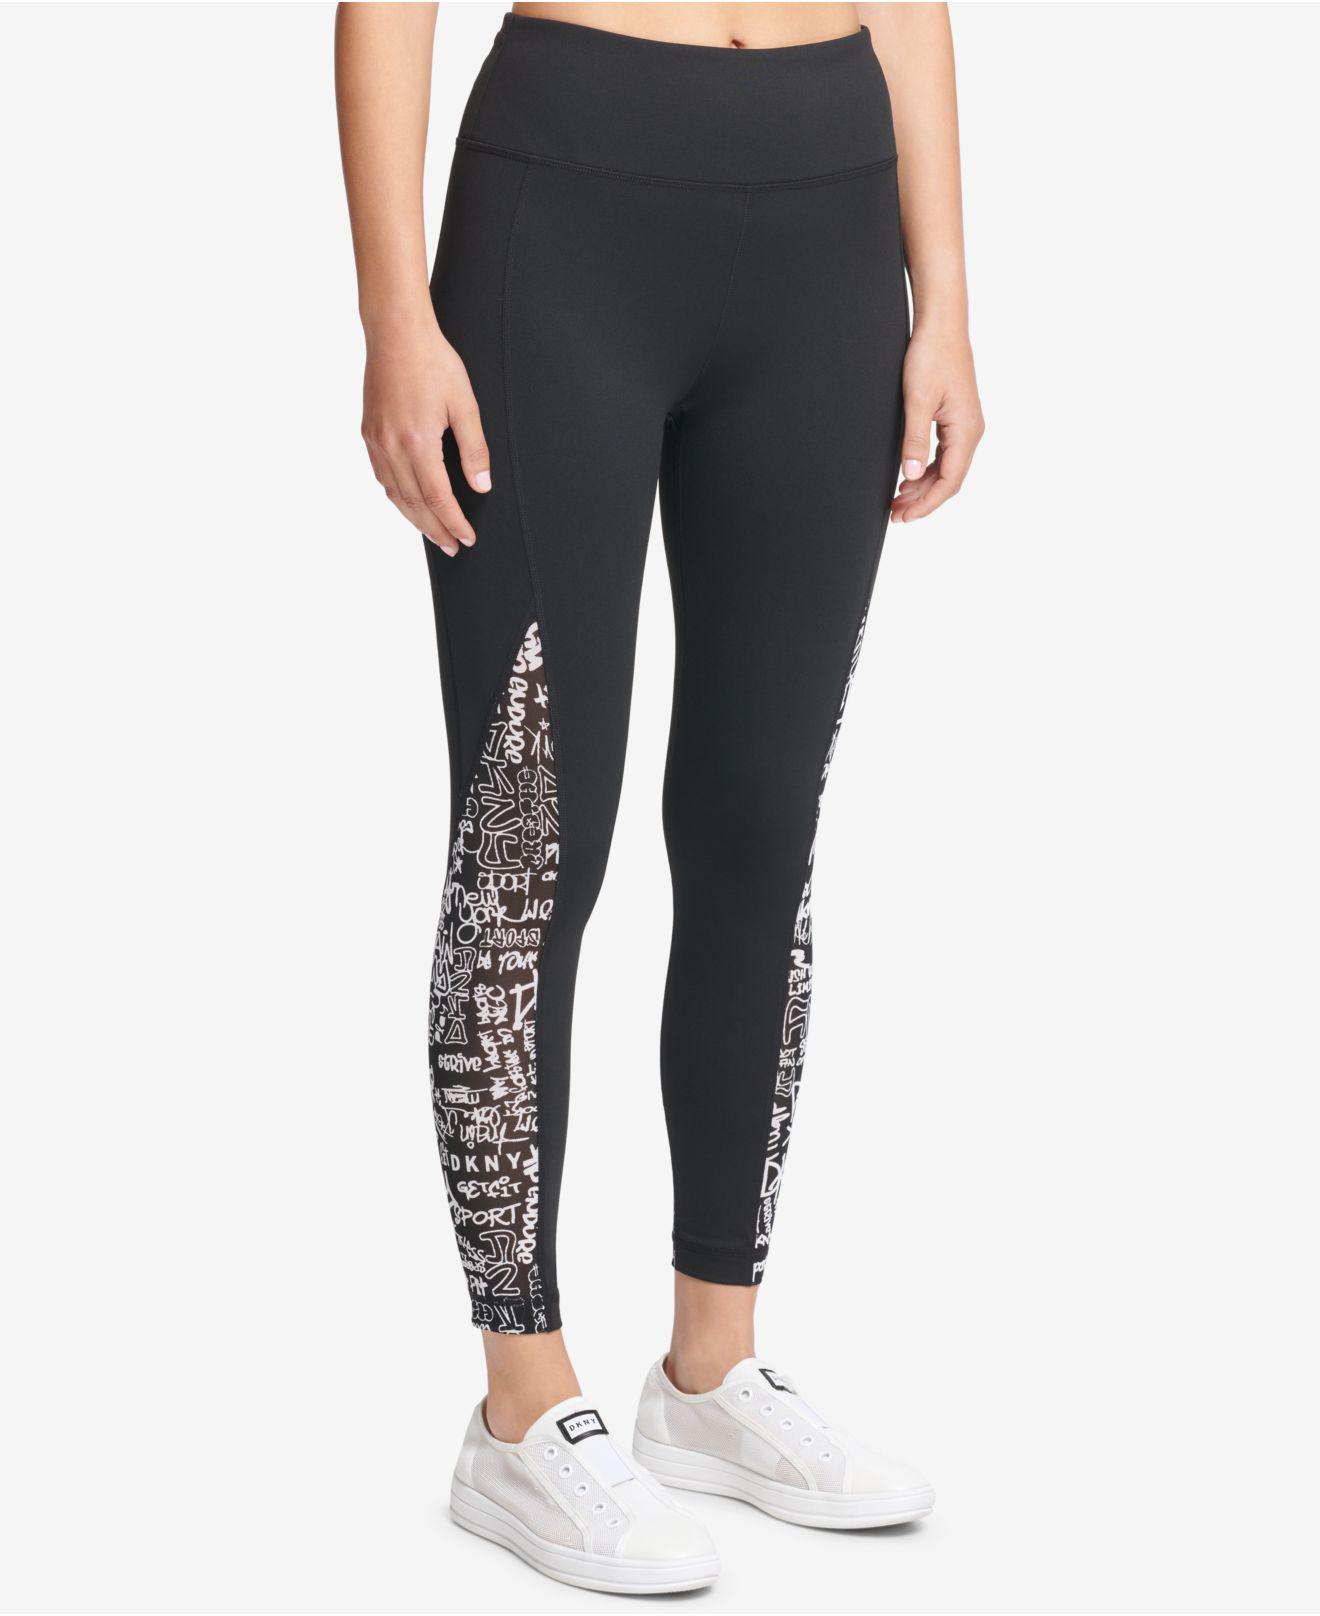 DKNY Women's Plus High Waisted Cotton Span Legging, Zest at Amazon Women's  Clothing store